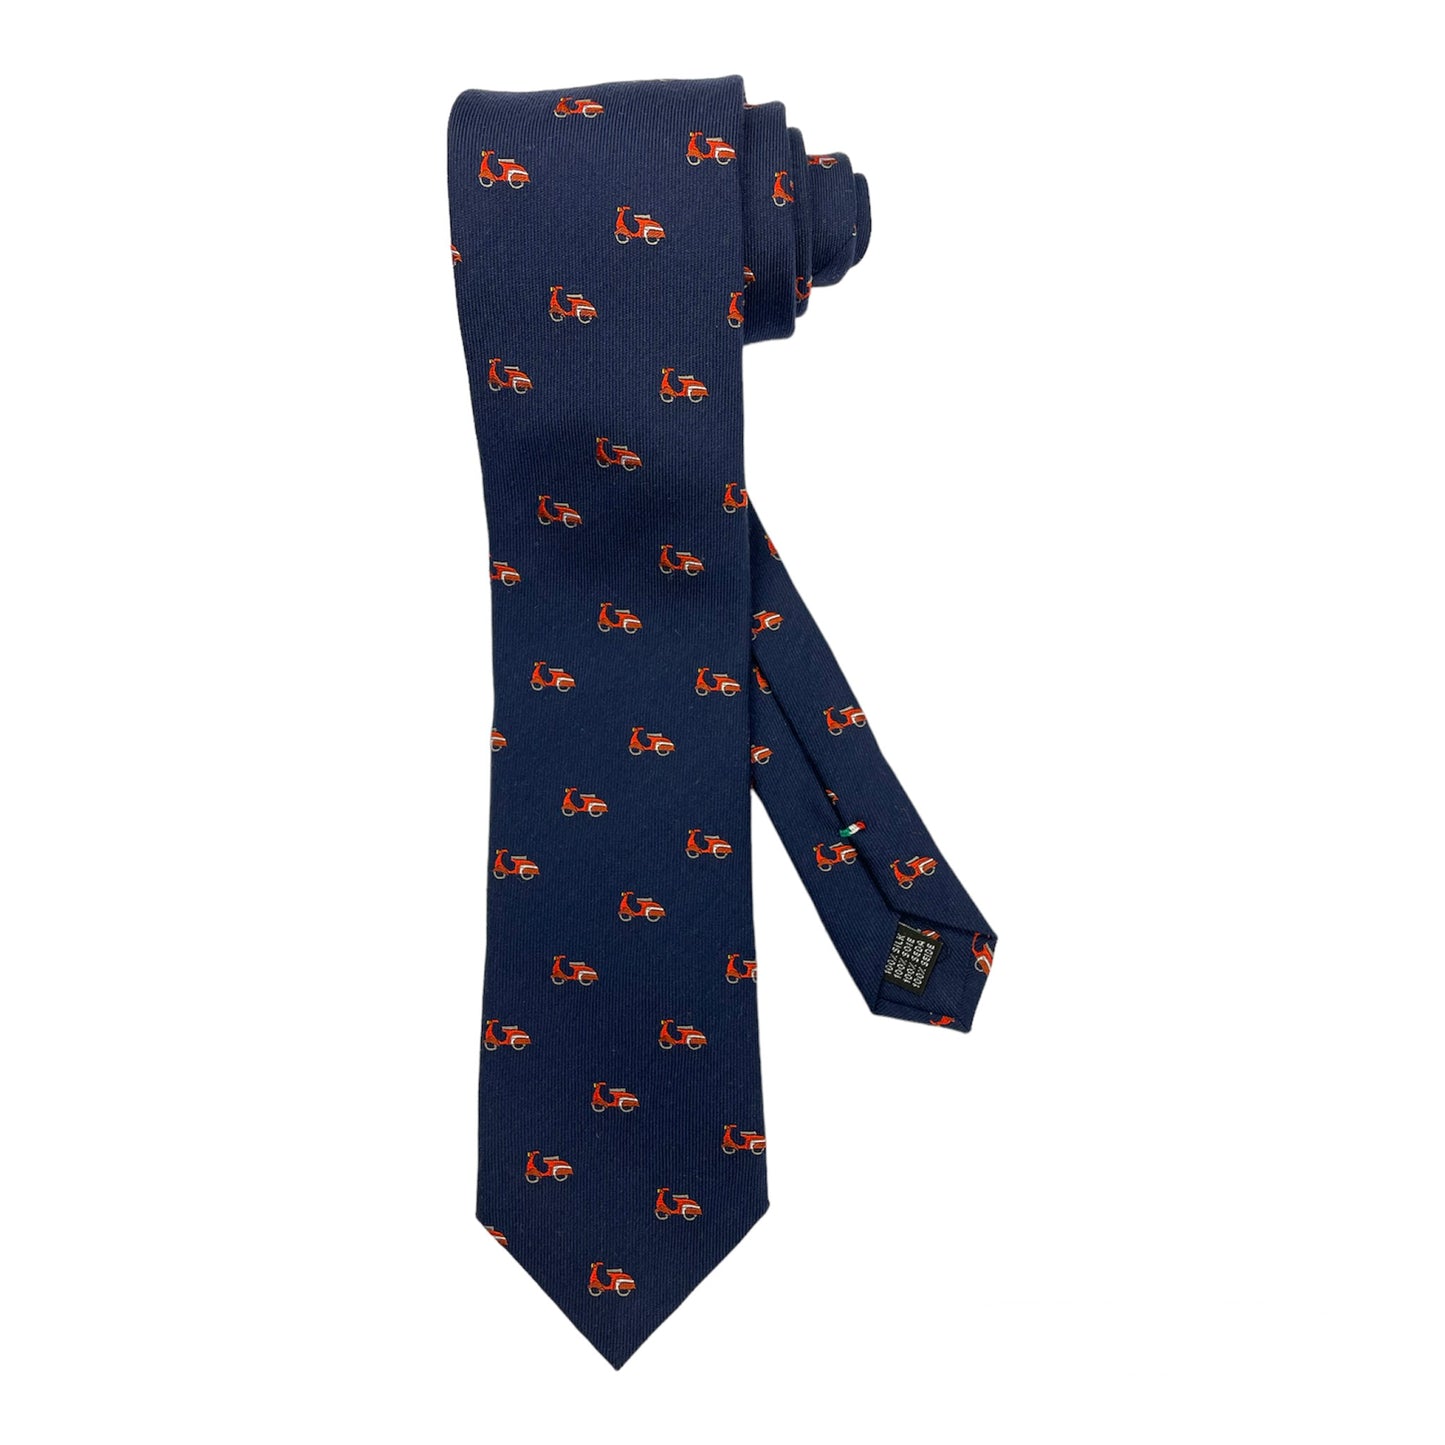 Blue silk tie with red wasps